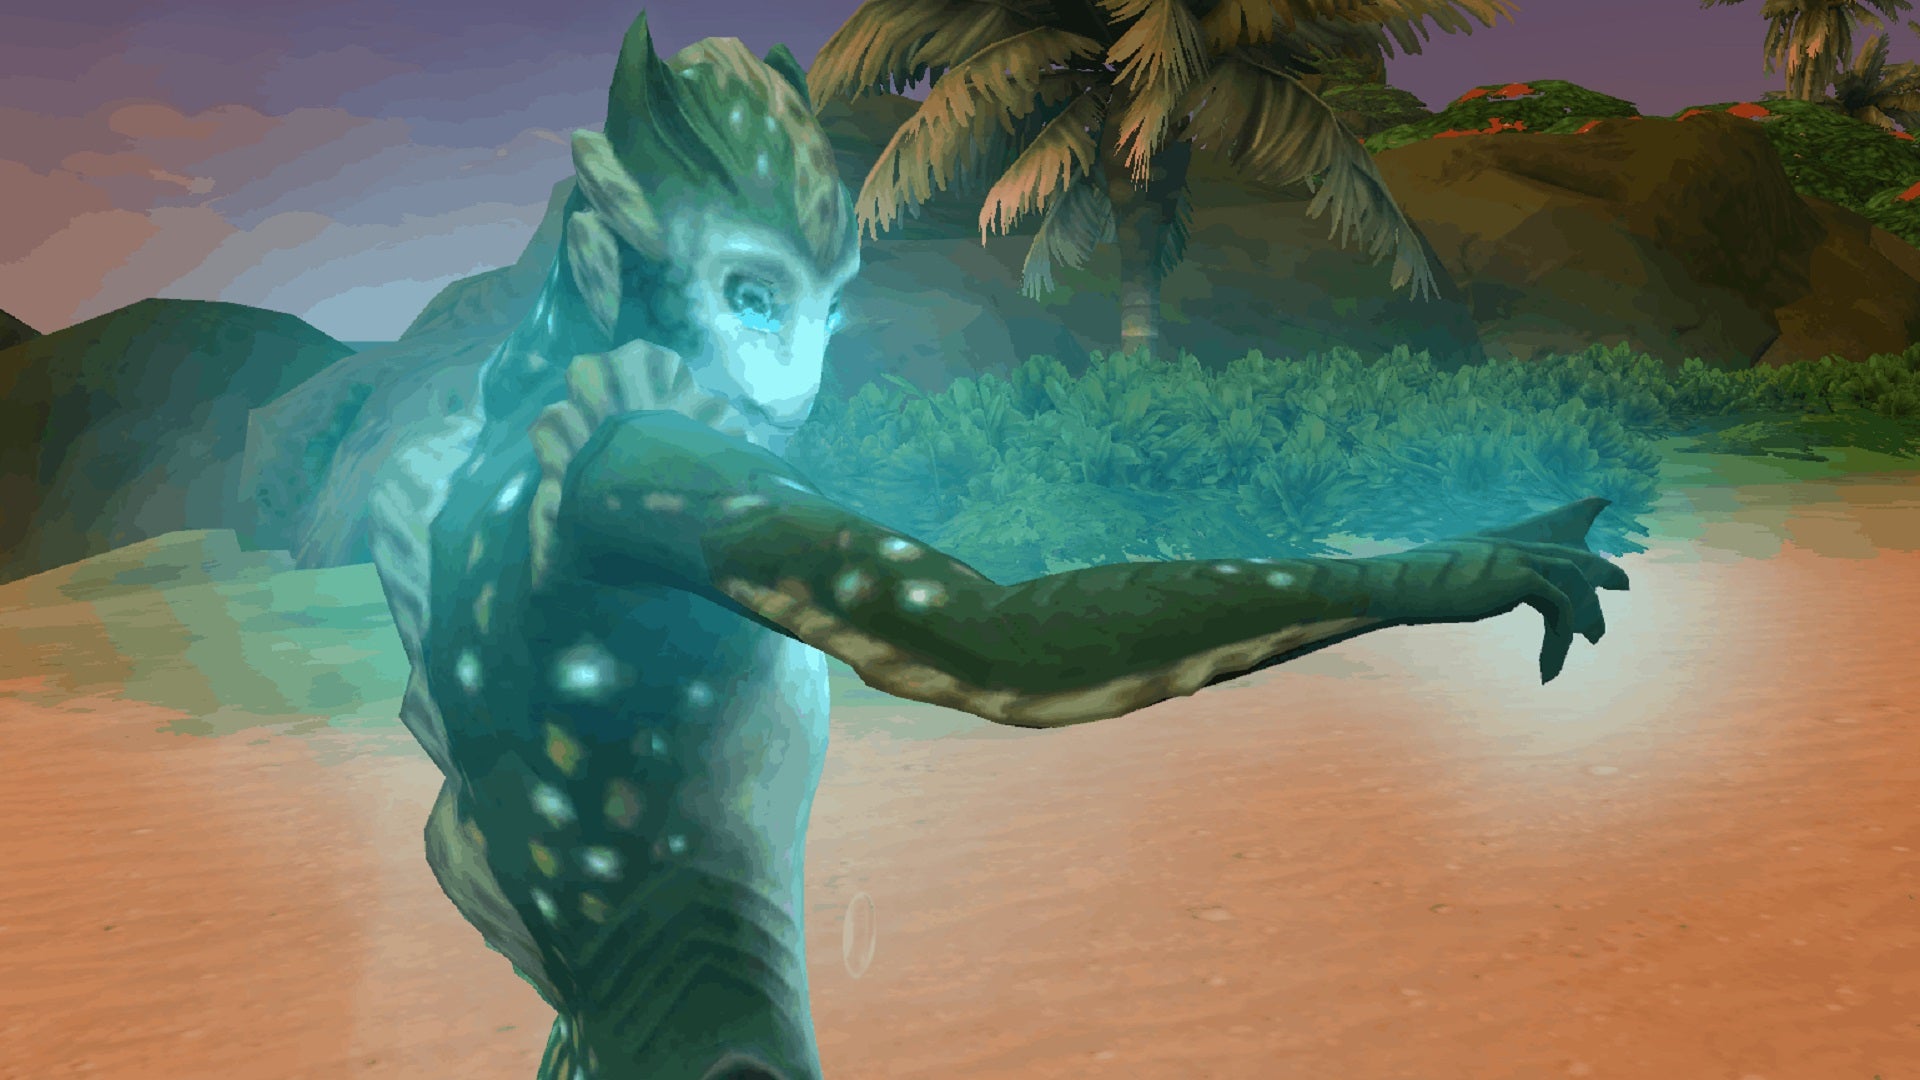 A Kelpie (mermaid) Sim with an eerie blue glow around them strikes a magical pose on a beach in The Sims 4 with the Expanded Mermaids mod.